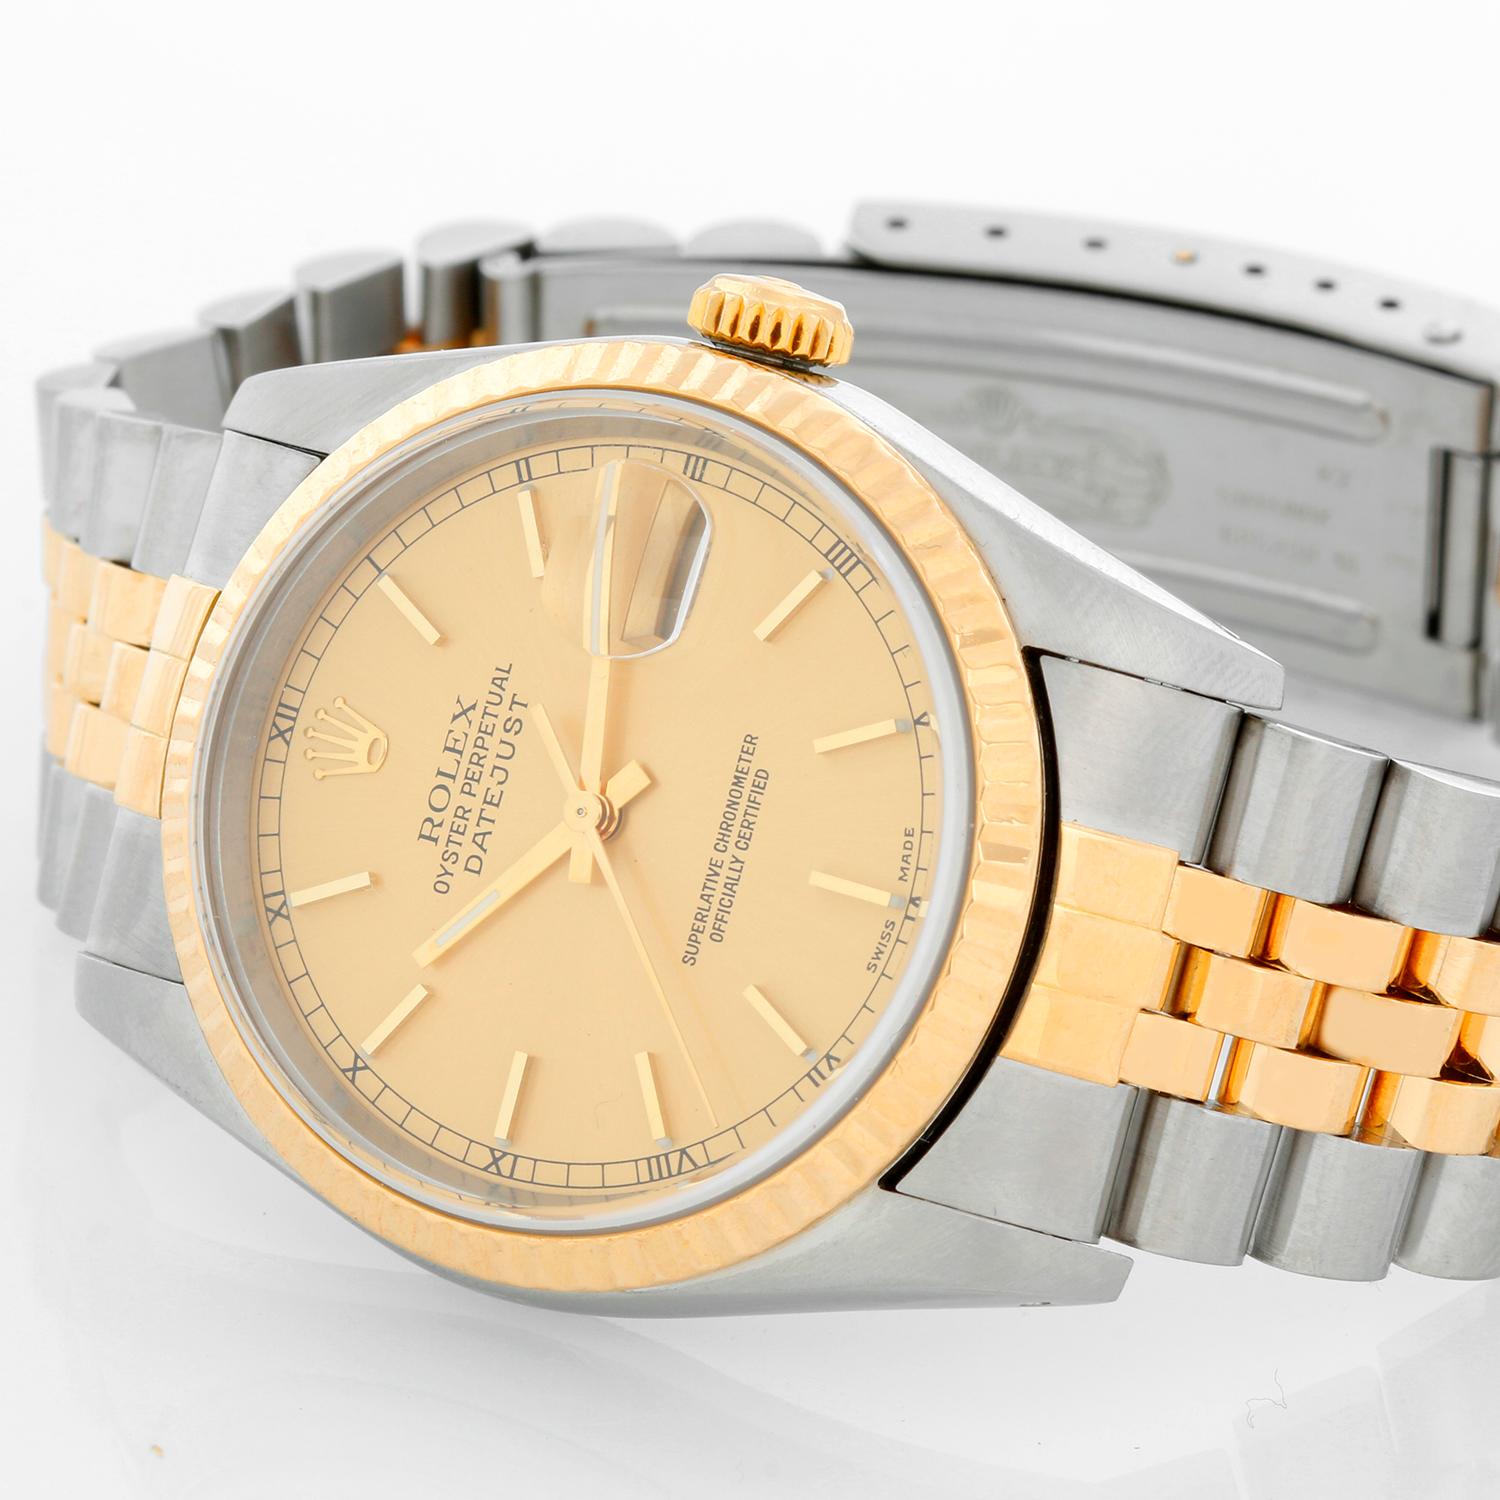 Rolex Datejust 2-Tone Men's Steel & Gold Watch 16233 - Automatic winding, Quickset, sapphire crystal. Stainless steel case with 18k yellow gold fluted bezel (36mm diameter). Champagne dial with stick hour markers. Stainless steel and 18k yellow gold